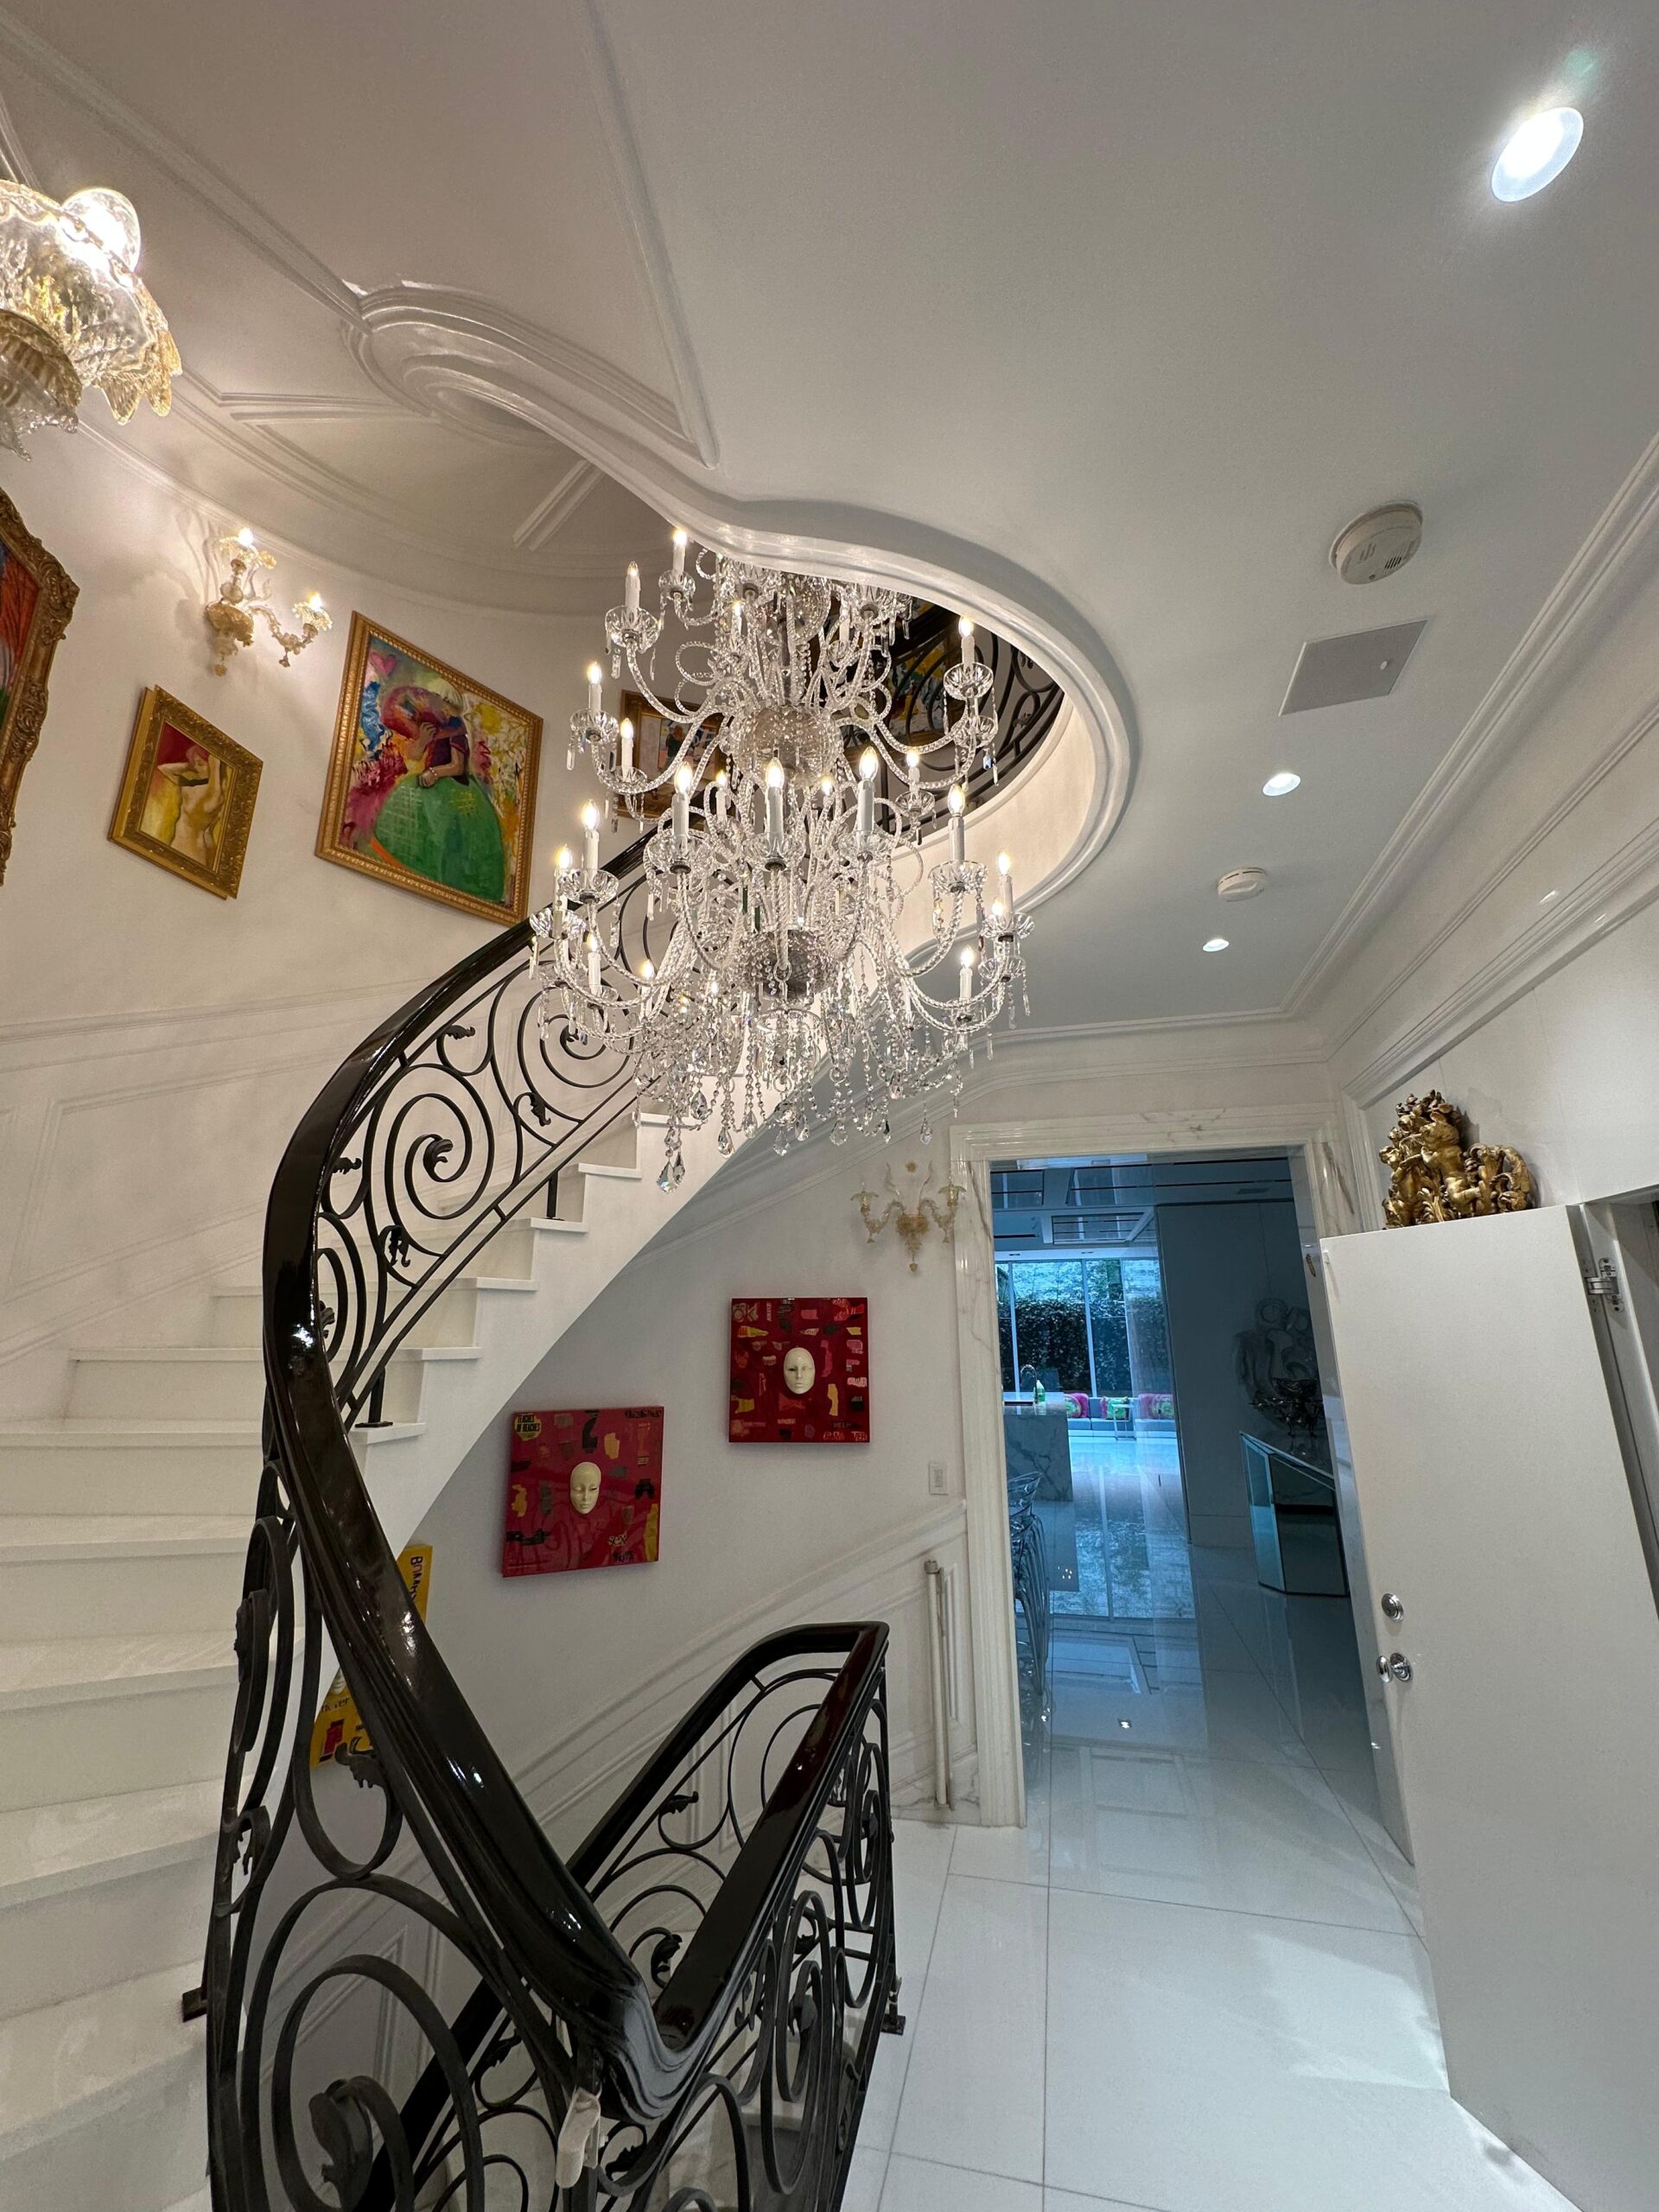 Elegant staircase with chandelier and wall art in a home, cleaned by Clarke's Service Professionals.